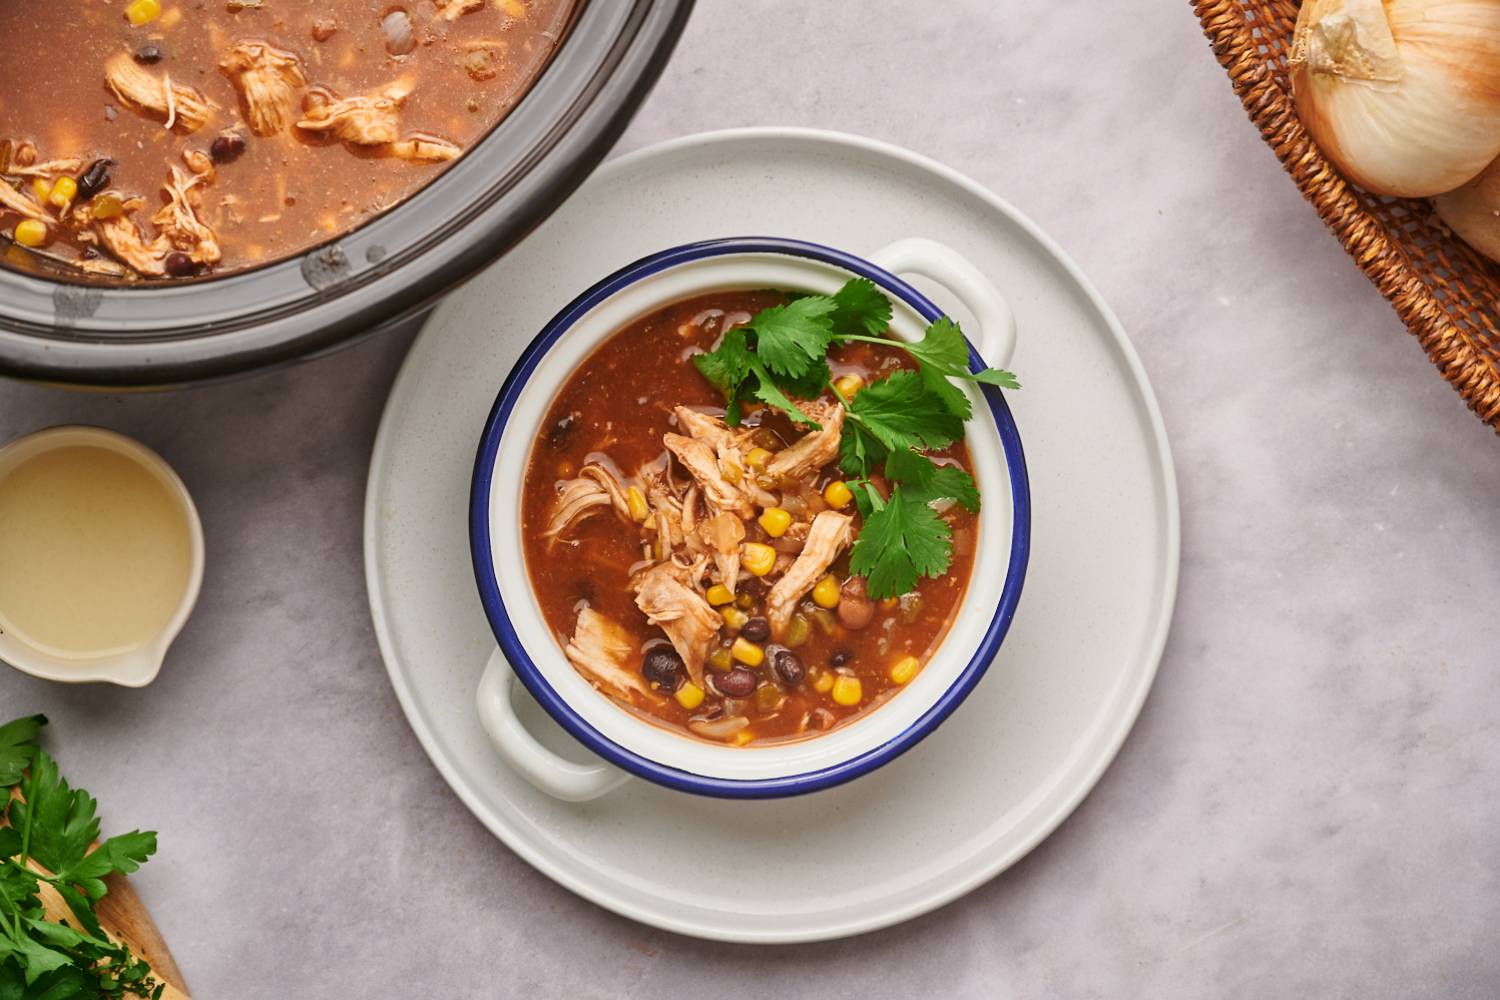 Healthy taco soup with black beans, pinto beans, shredded chicken, cilantro, and cheese.